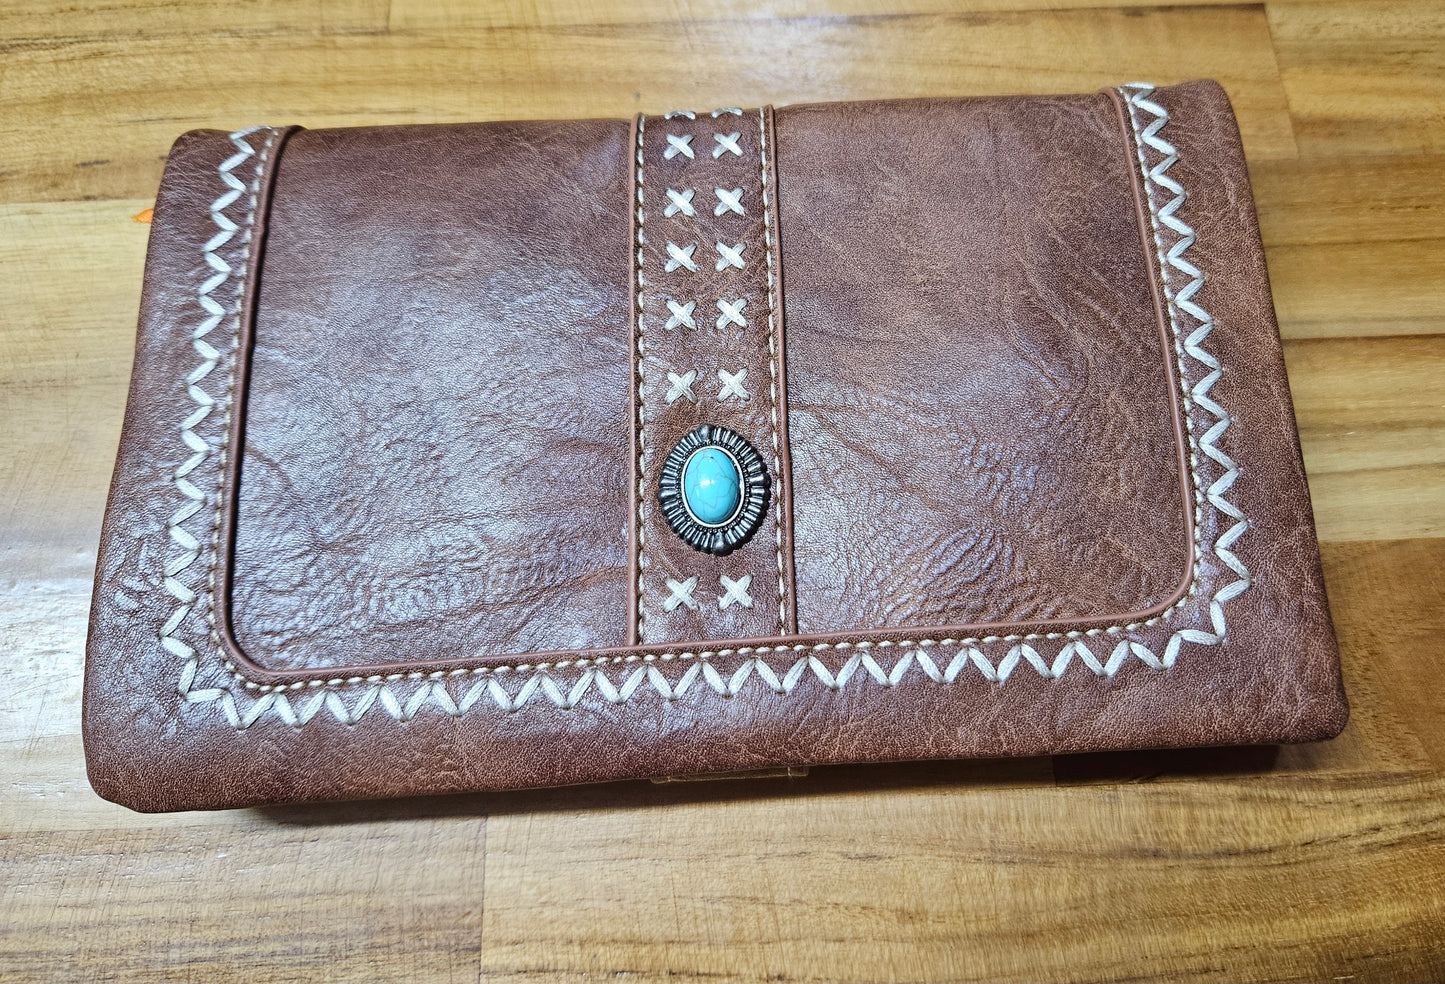 American Bling Crossbody Wallet/Clutch - Brown/Turquoise